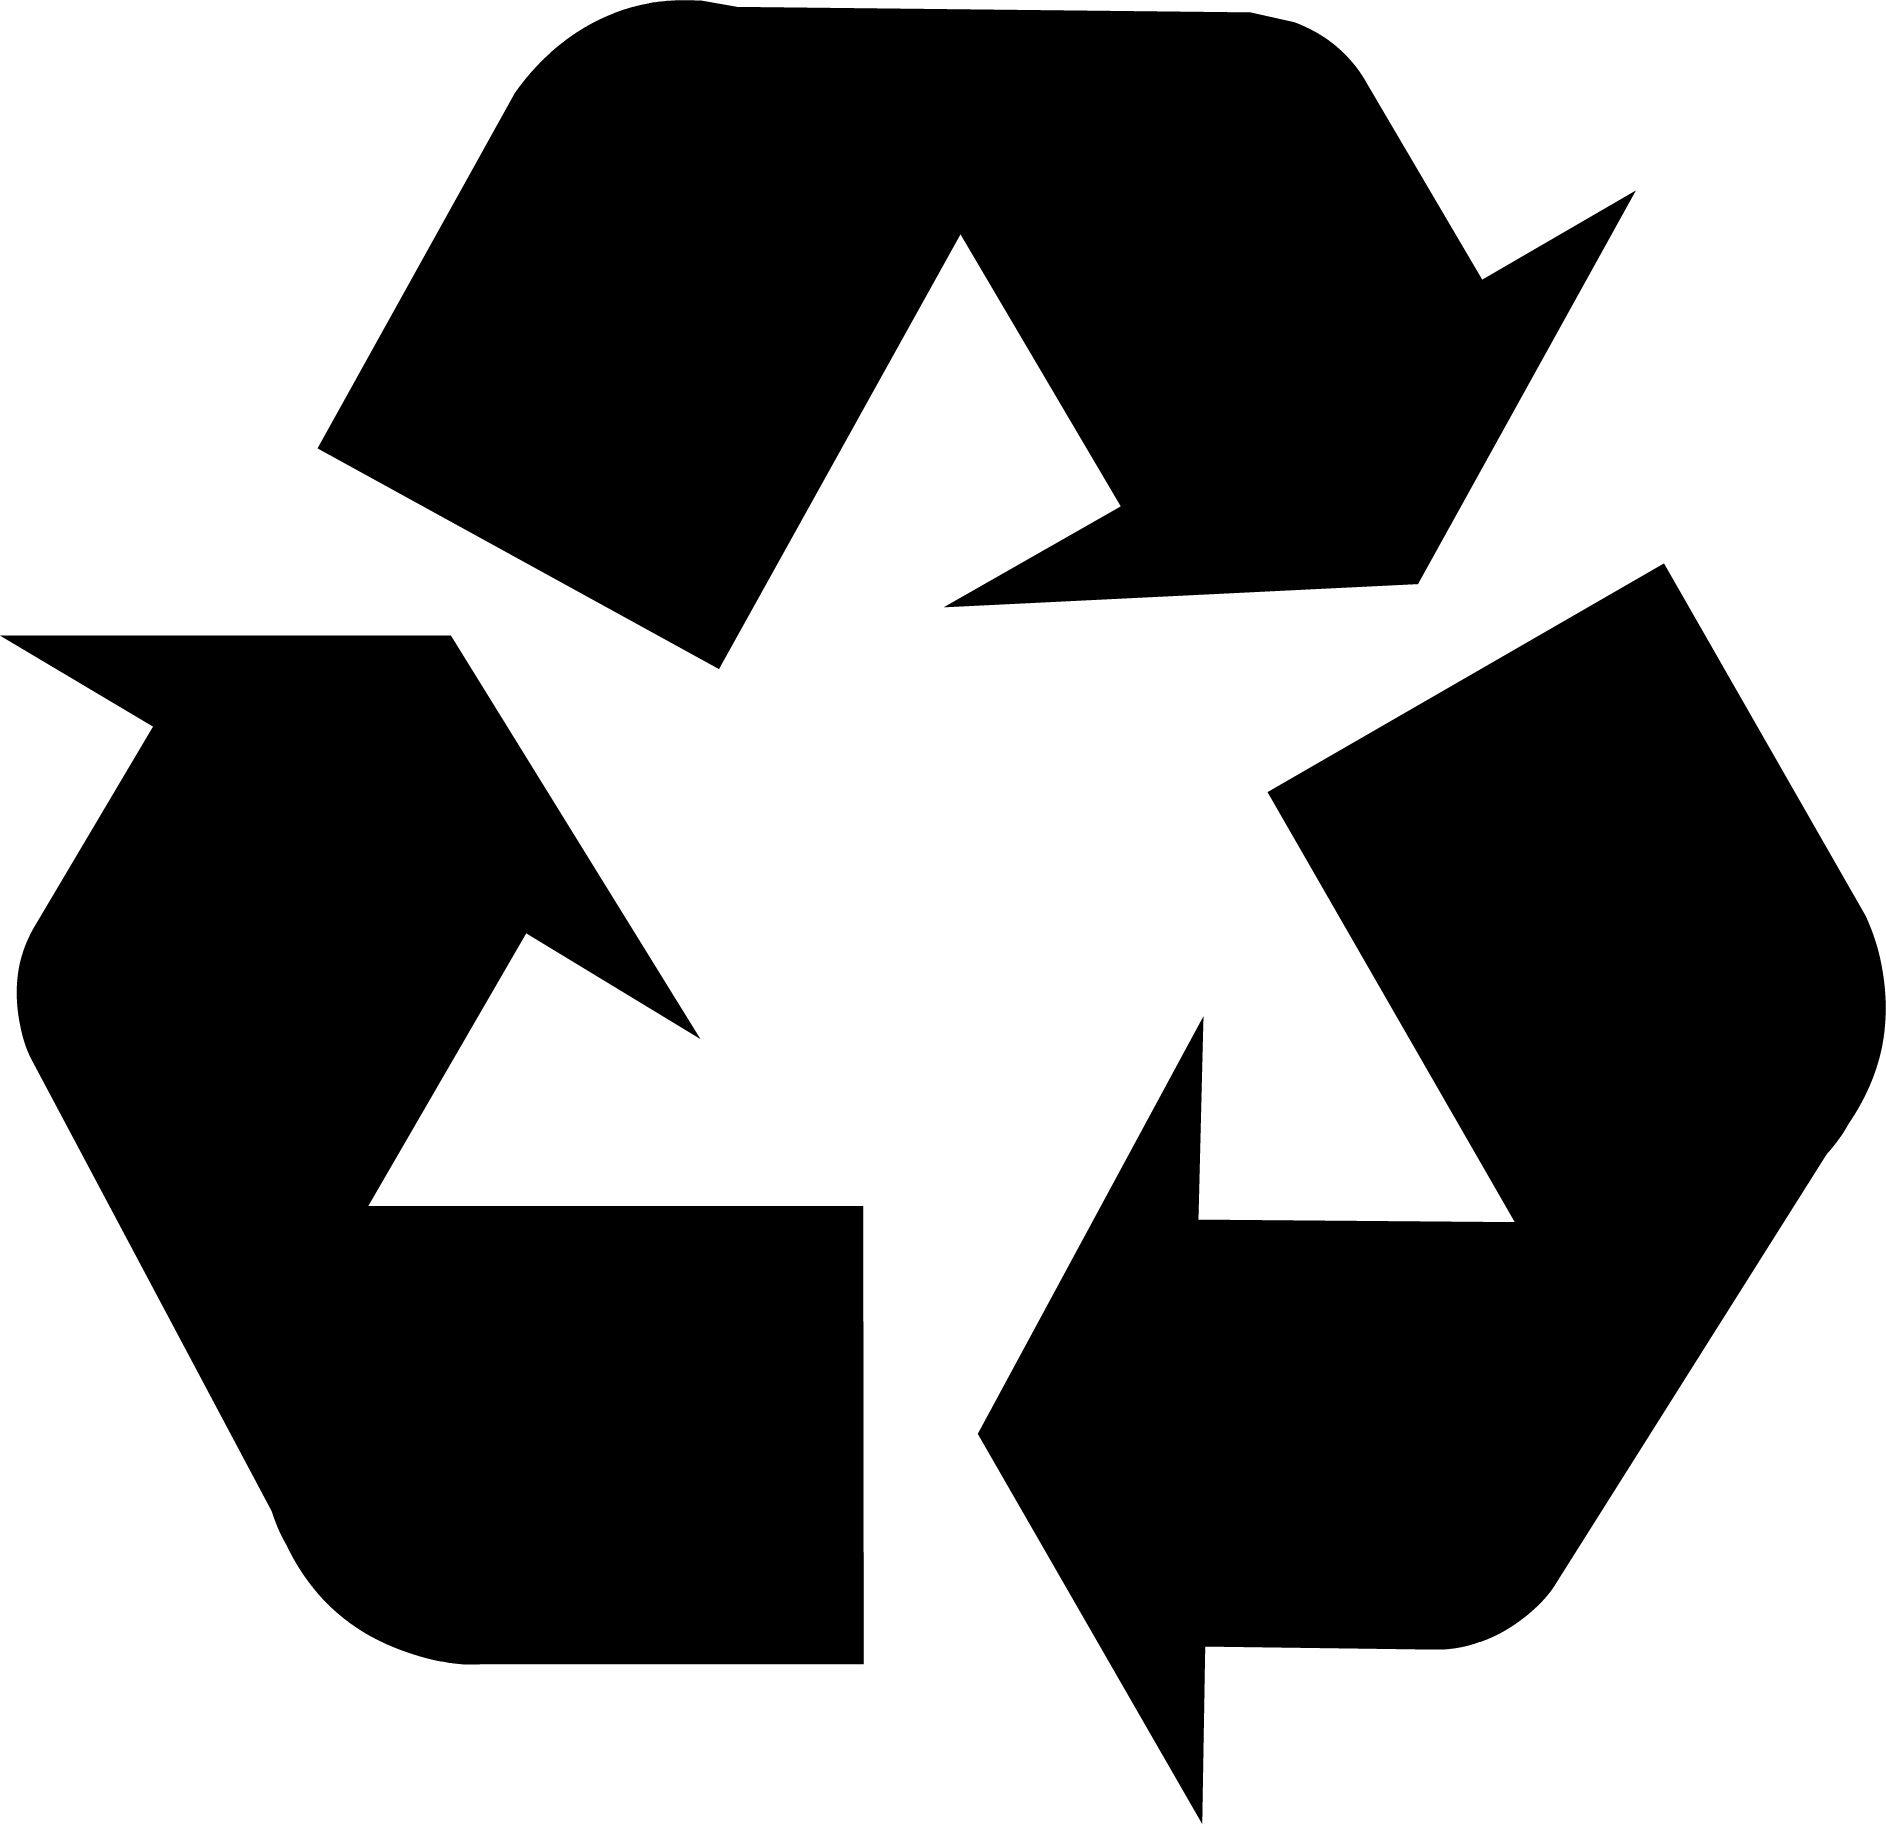 Easy to Draw Black and White Vector Logo - Recycling Symbol the Original Recycle Logo